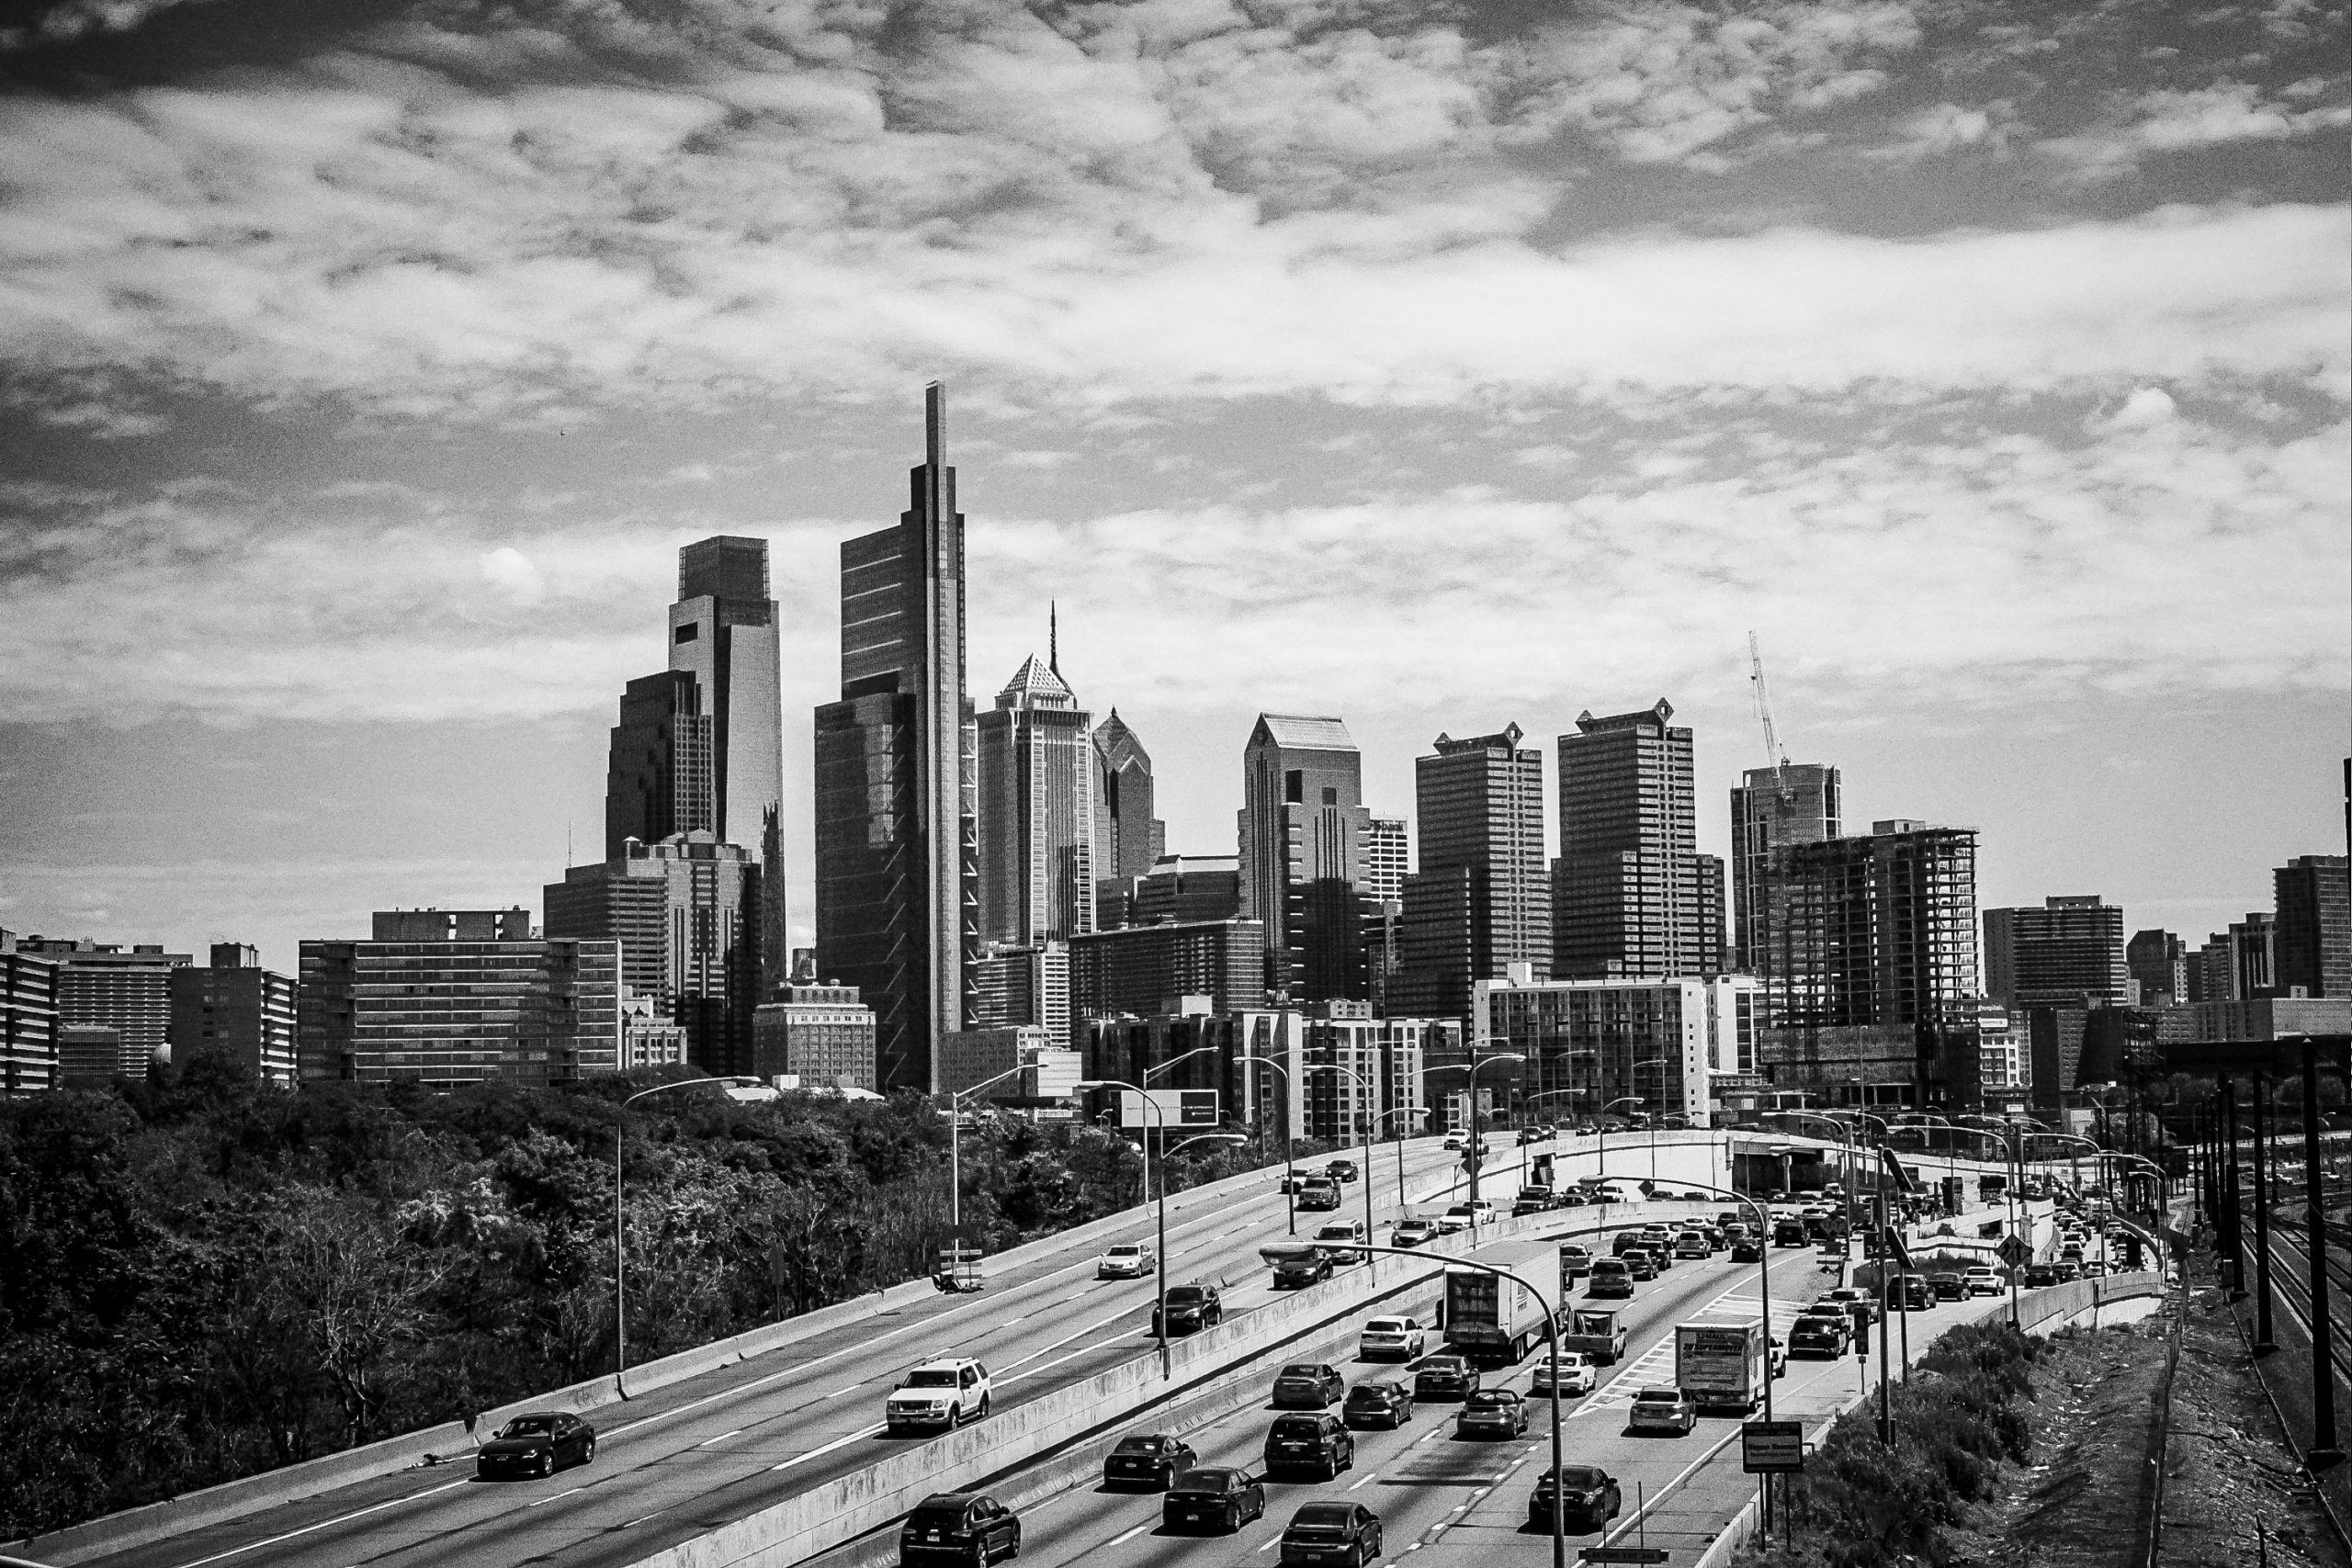 Philly Photo By Jared B On UnSplash